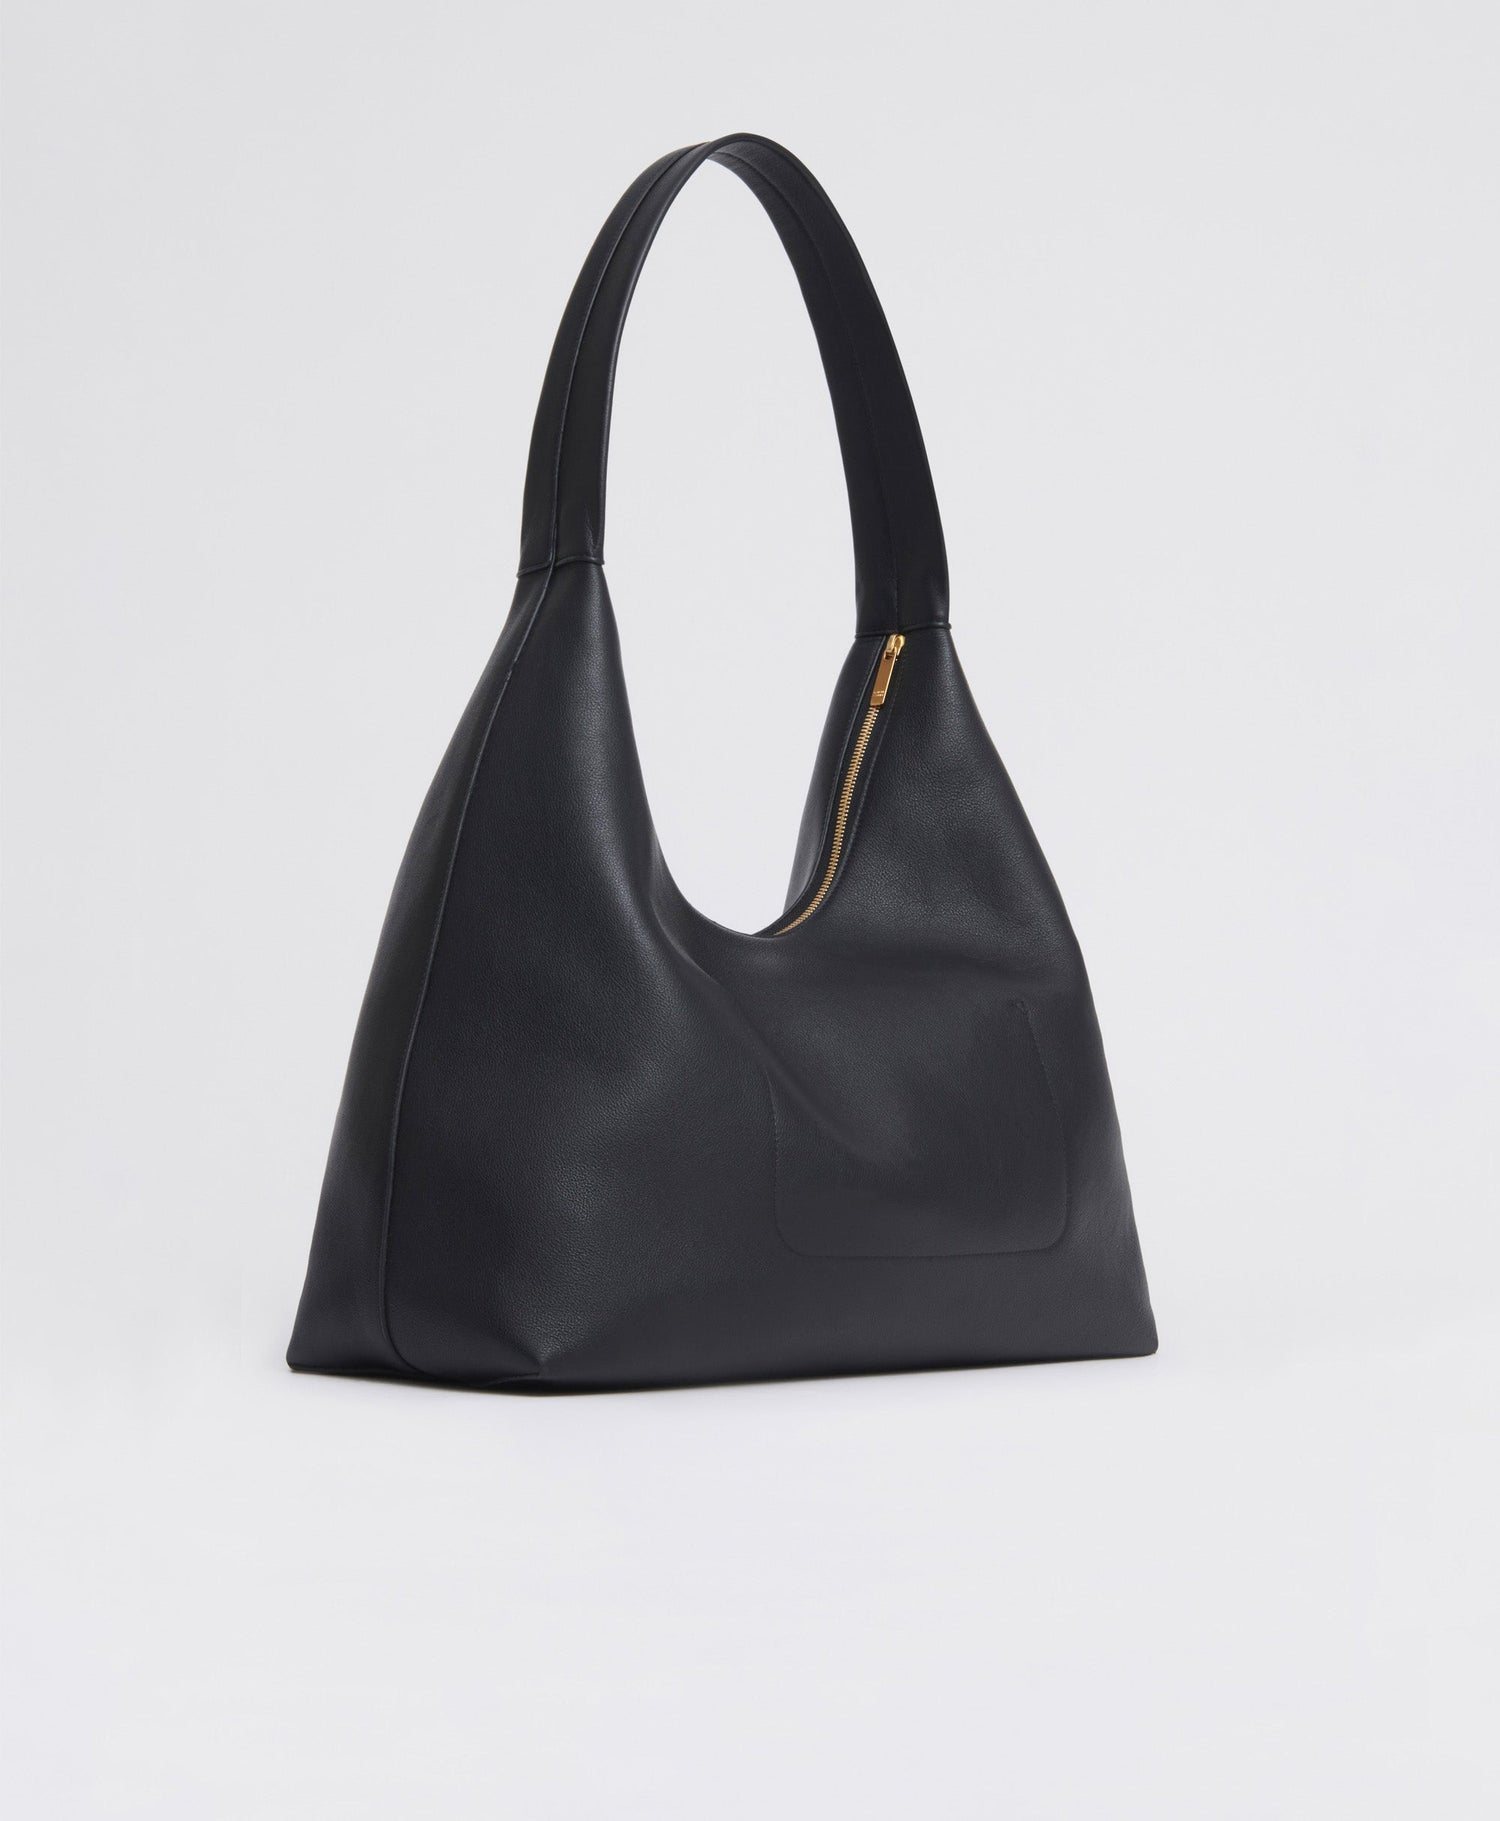 Hobo Bag - Courrèges - Red - Leather